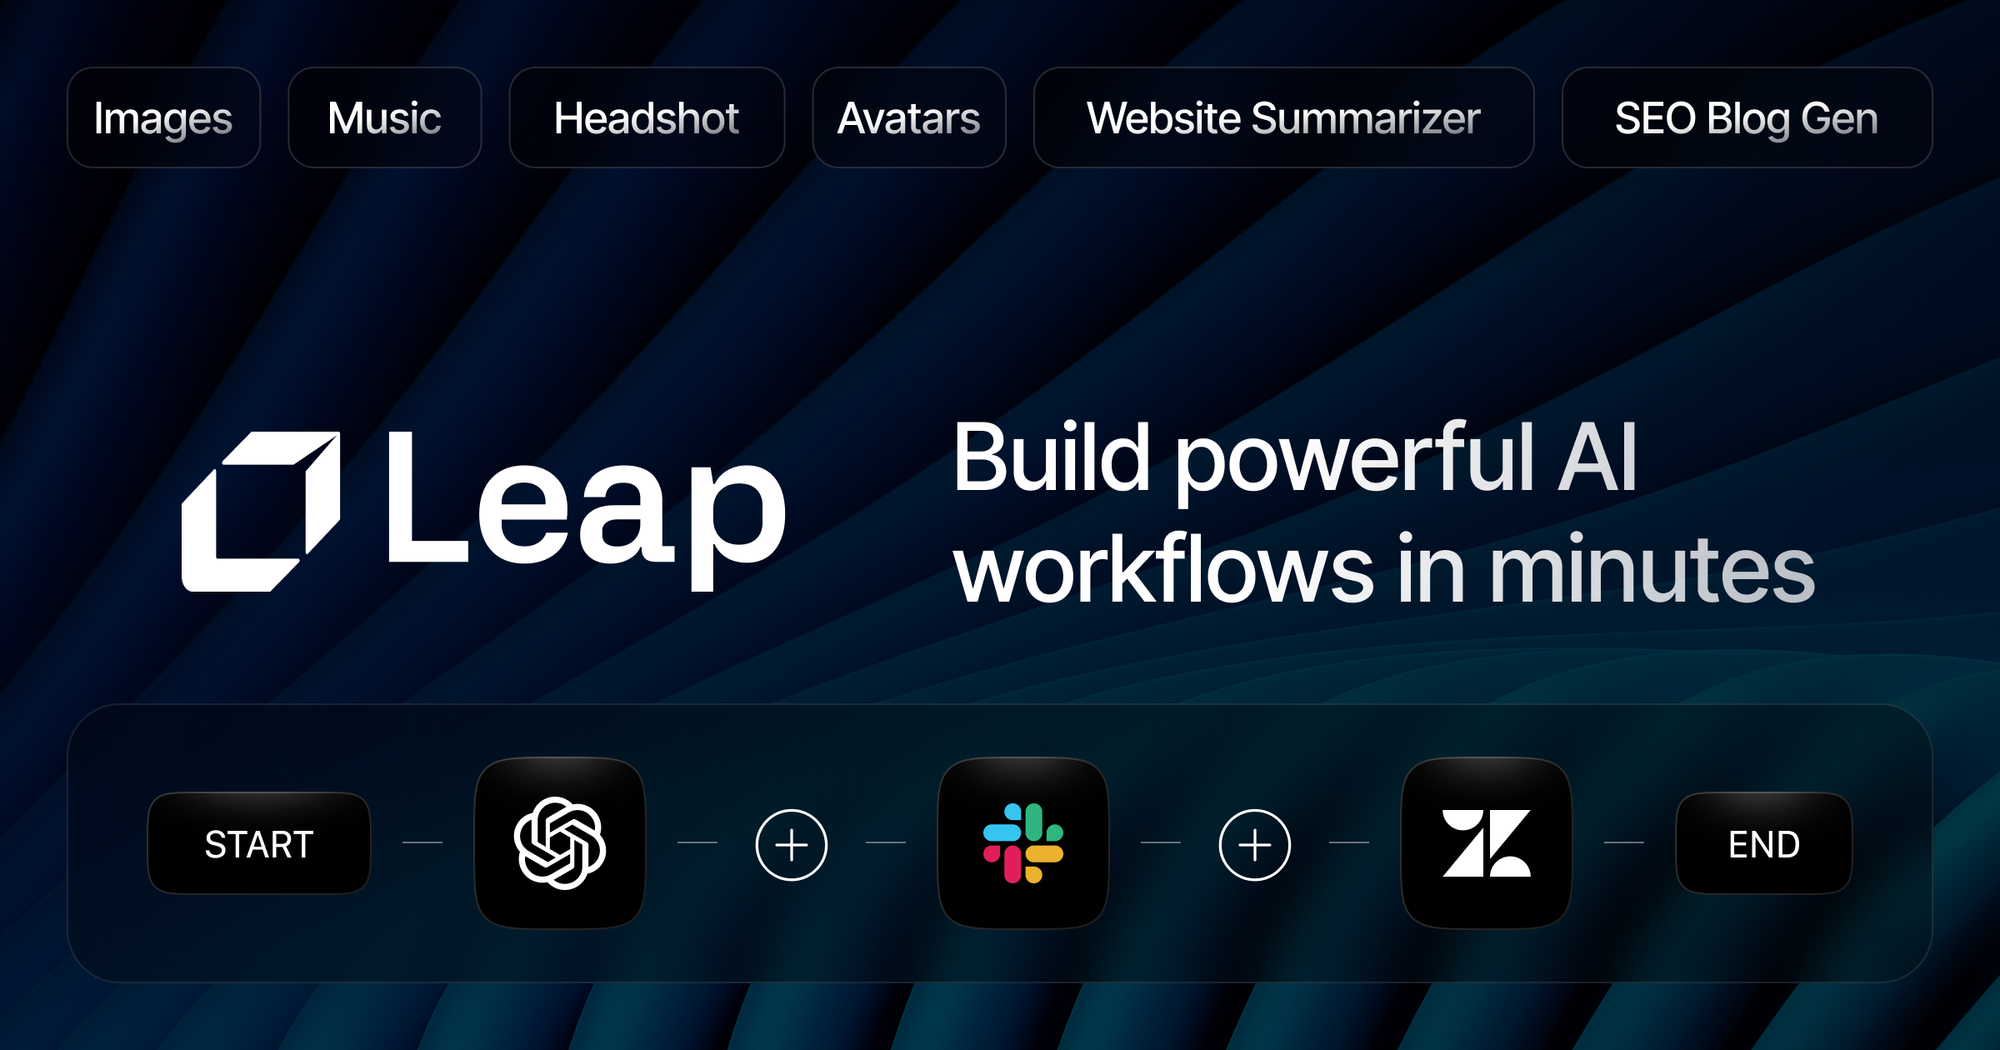 Use Leap's AI Tools for Small Business To Build Powerful AI Workflows for Your Business In Minutes